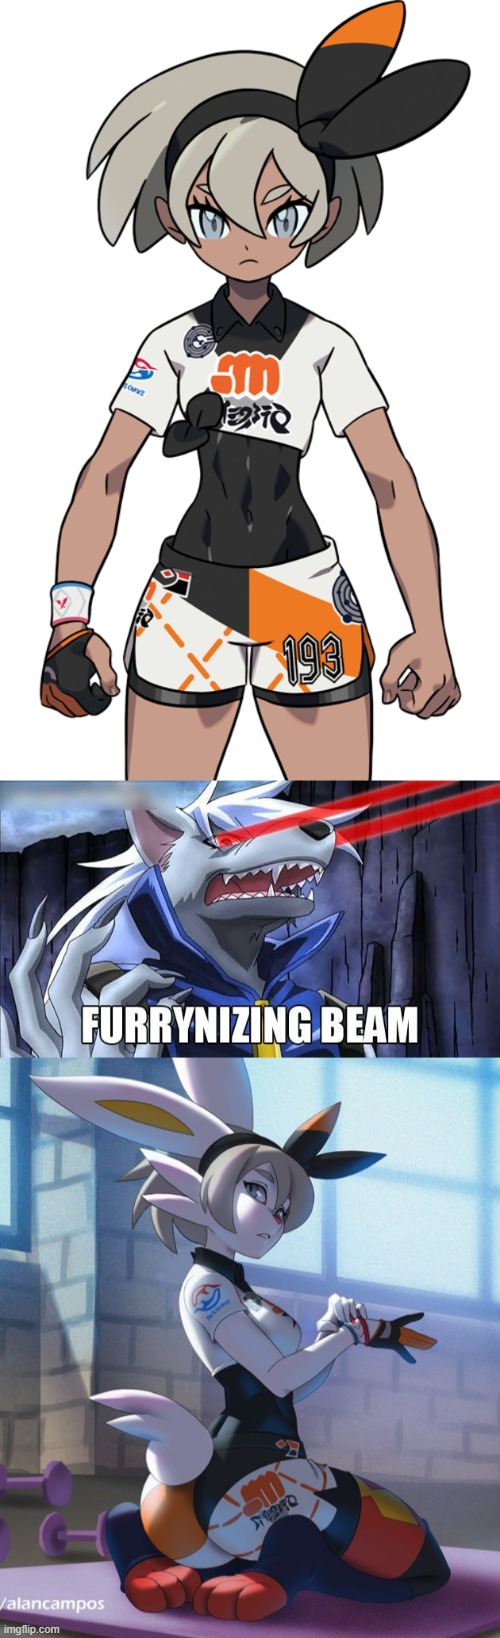 Bea (By alanscampos) | image tagged in furrynizing beam,furry,pokemon,cinderace,bea | made w/ Imgflip meme maker